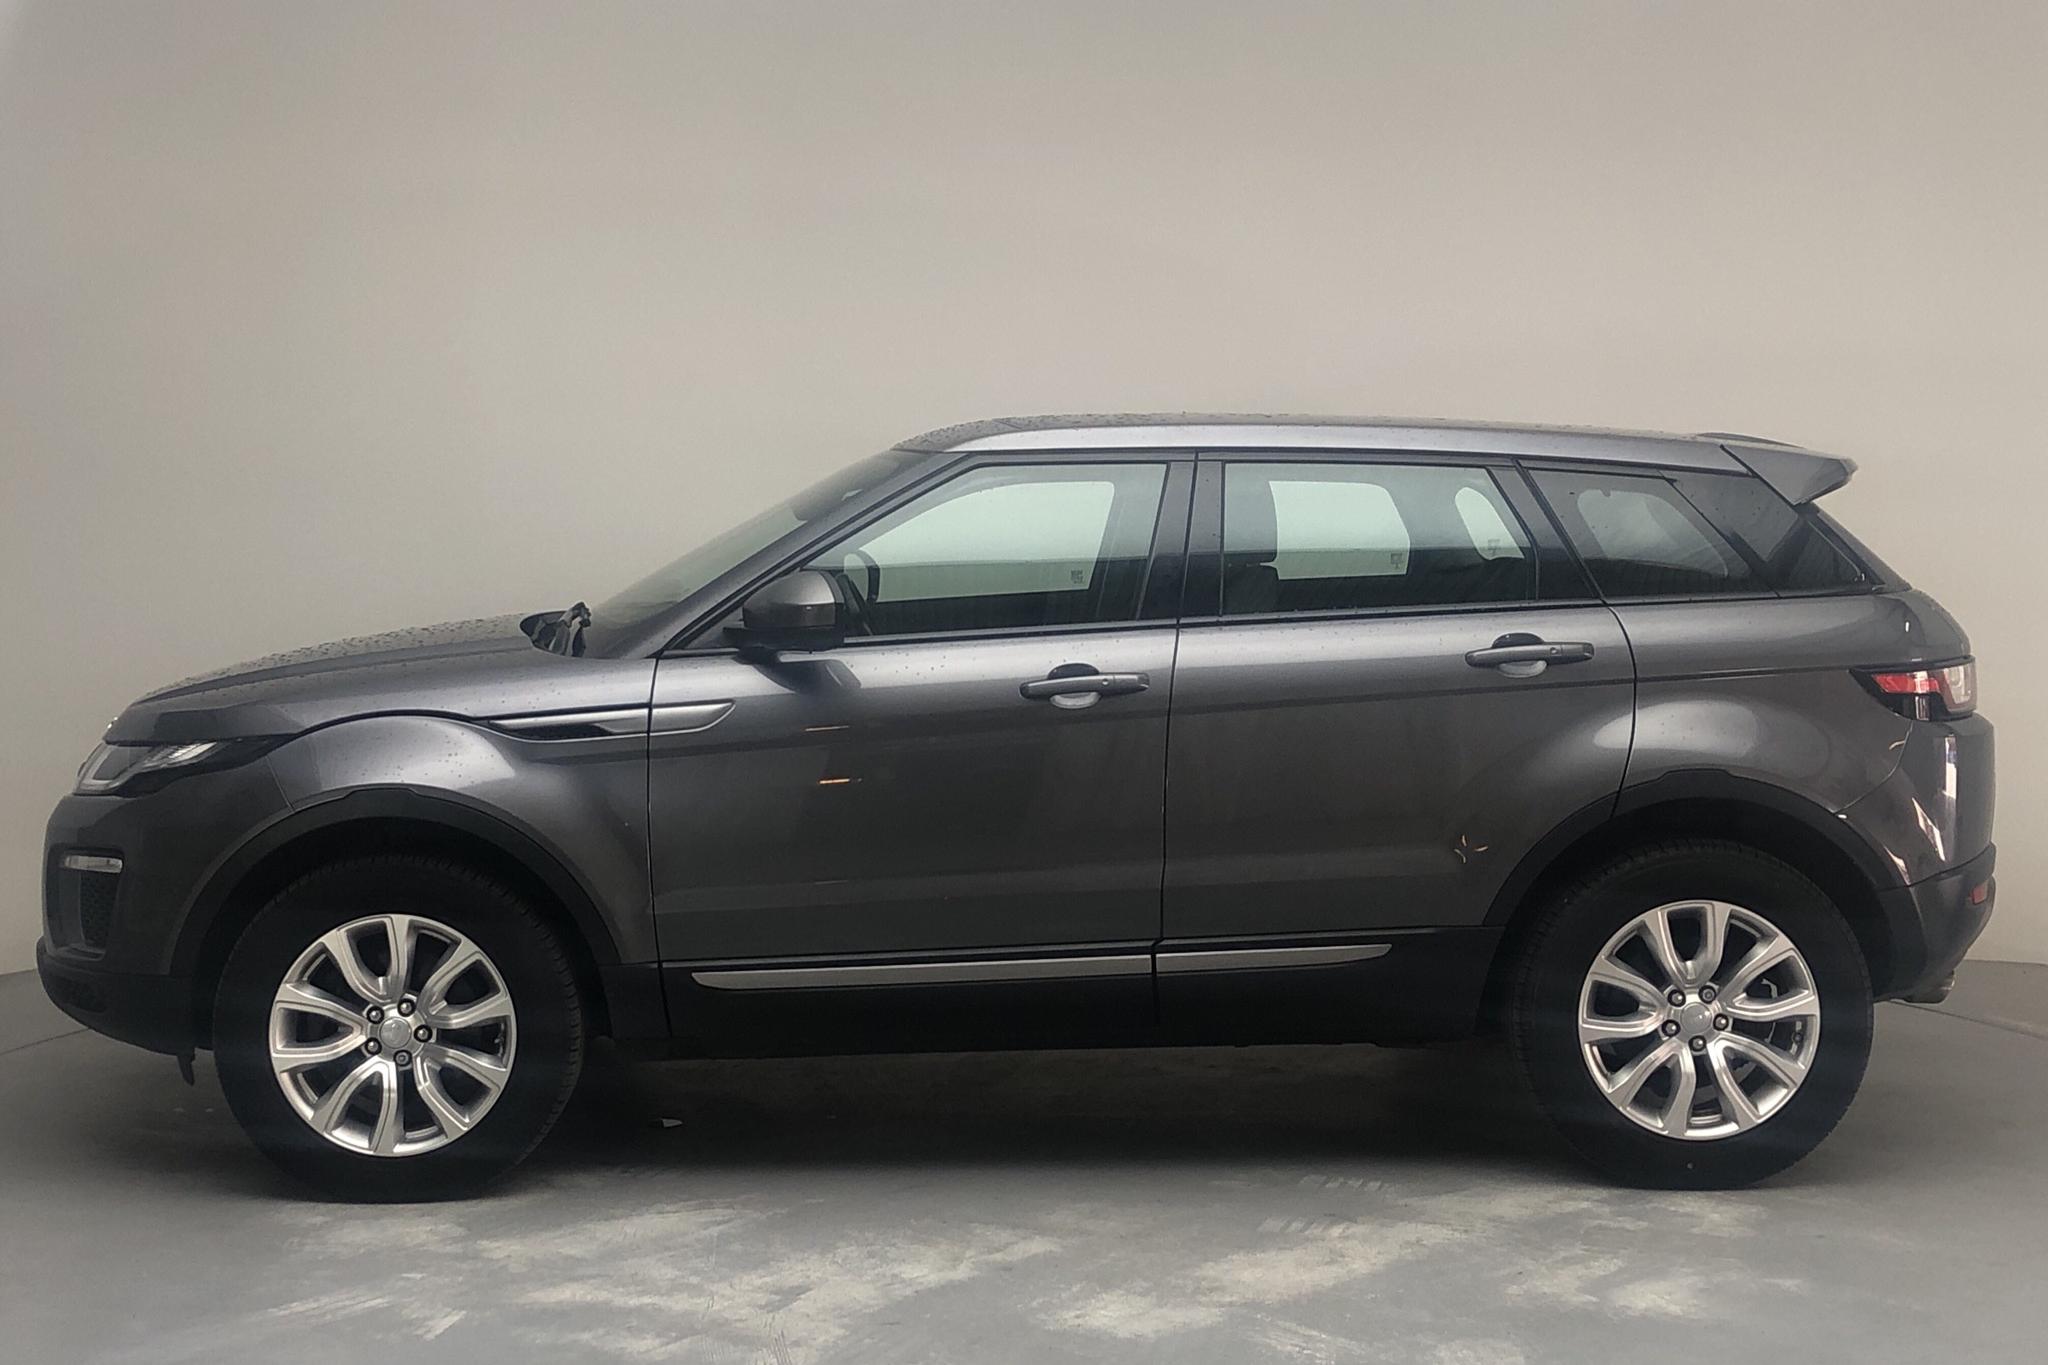 Land Rover Range Rover Evoque 2.0 TD4 AWD 5dr (150hk) - 100 220 km - Automatic - gray - 2017